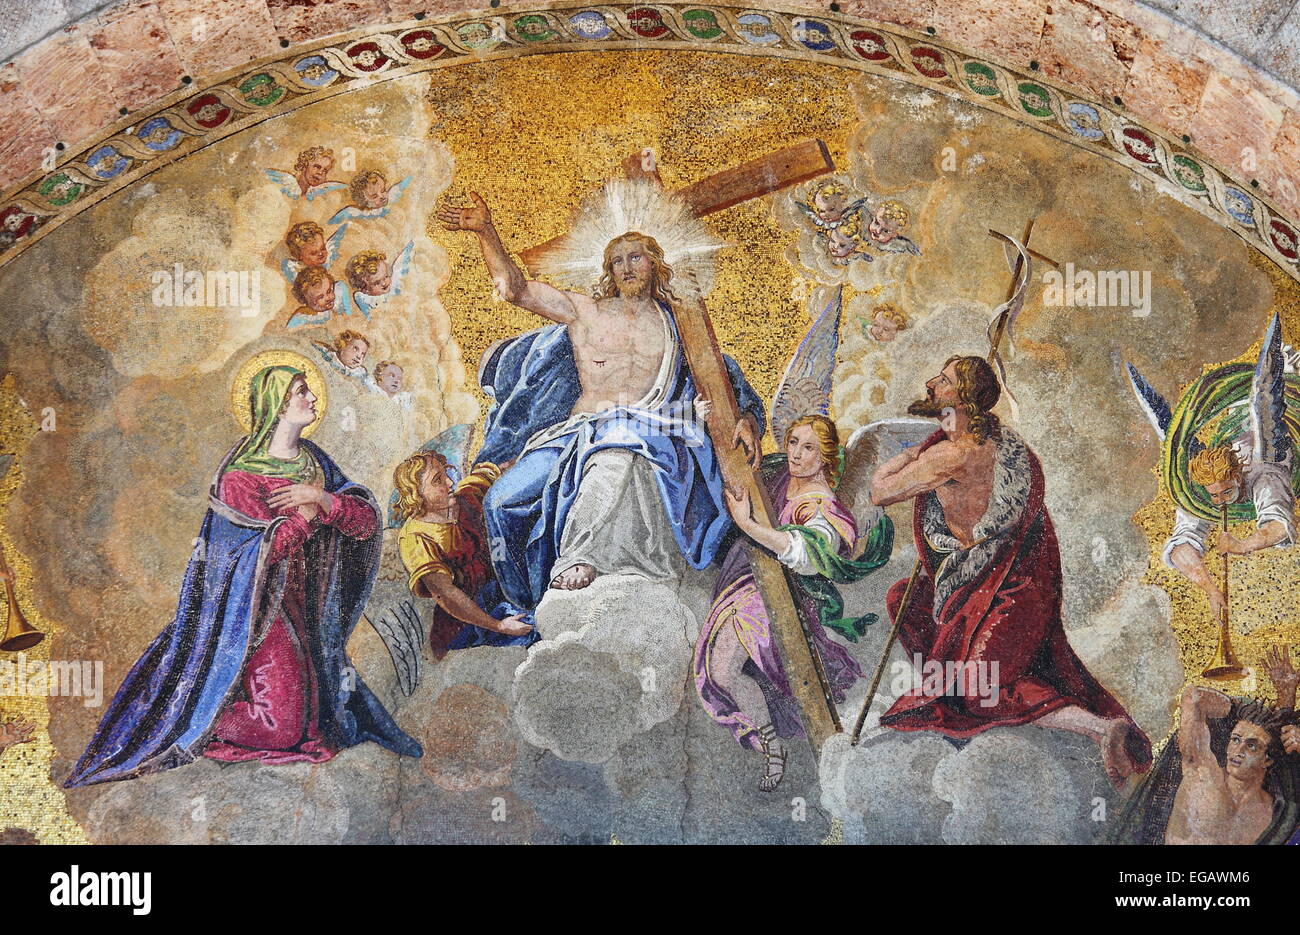 Mosaic in St. Mark Basilica depicting the Ascension of Jesus Christ. Venice, Italy Stock Photo